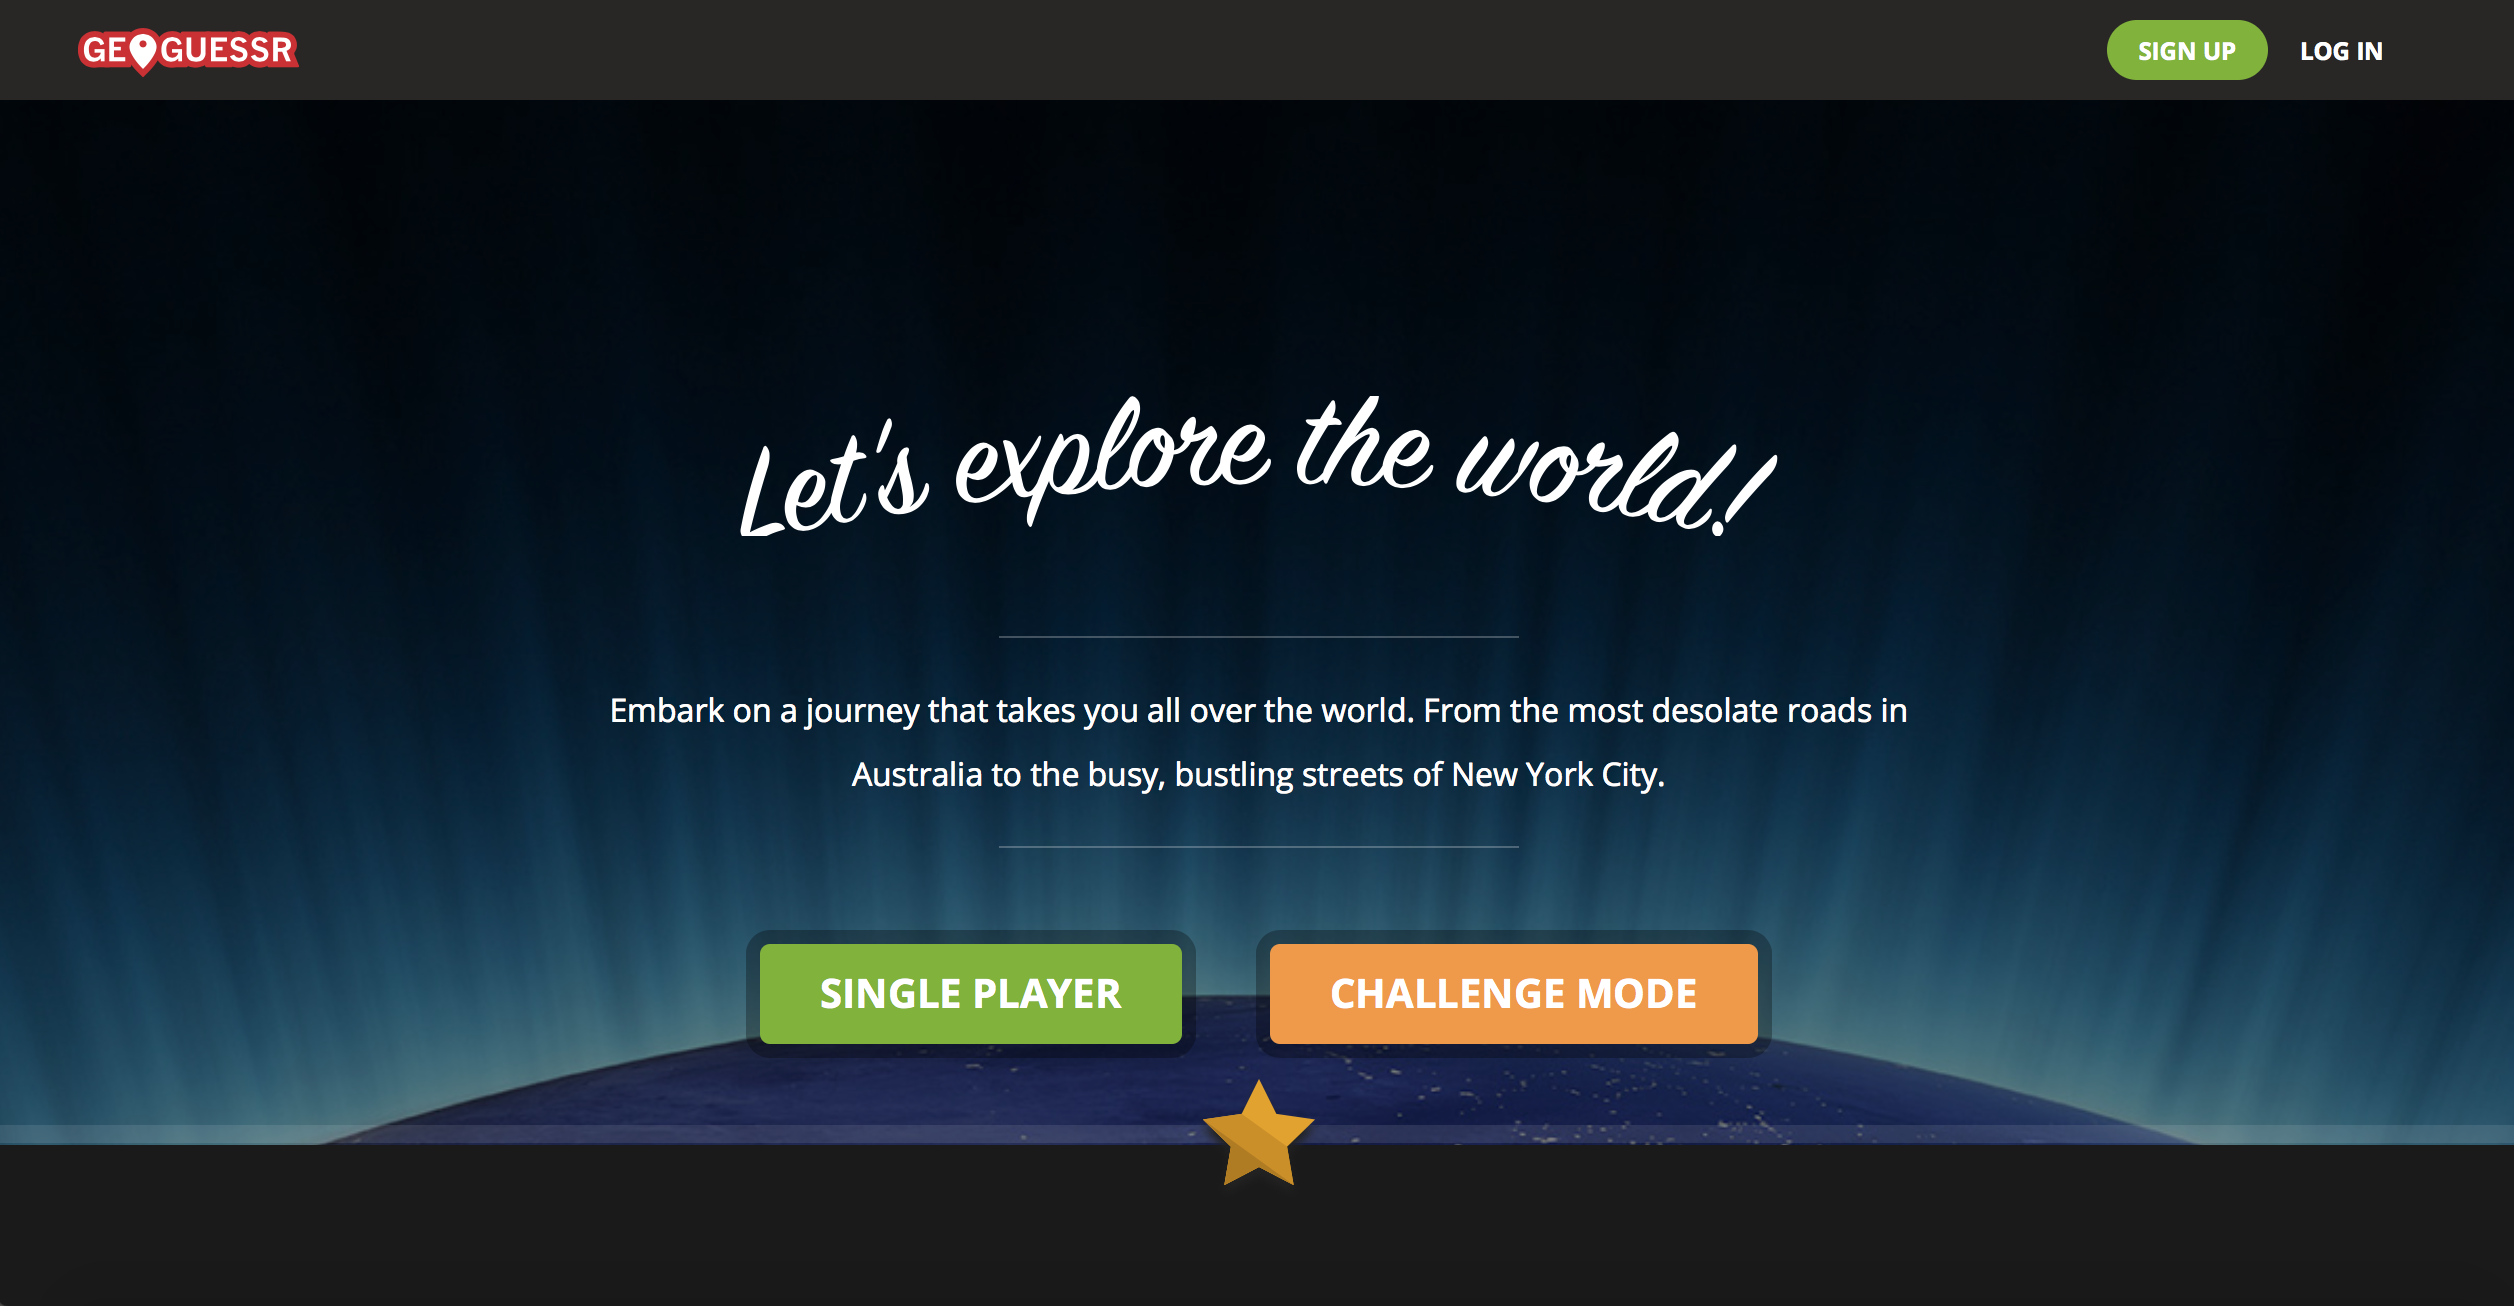 A dark background with the words "Let's explore the world!" in white text. Beneath it, the words "Embark on a journey that takes you all over the world. From the most desolate roads in Australia to the busy, bustling streets of New York City." Beneath that, two buttons that say, "Single Player" and "Challenge Mode, respectively.